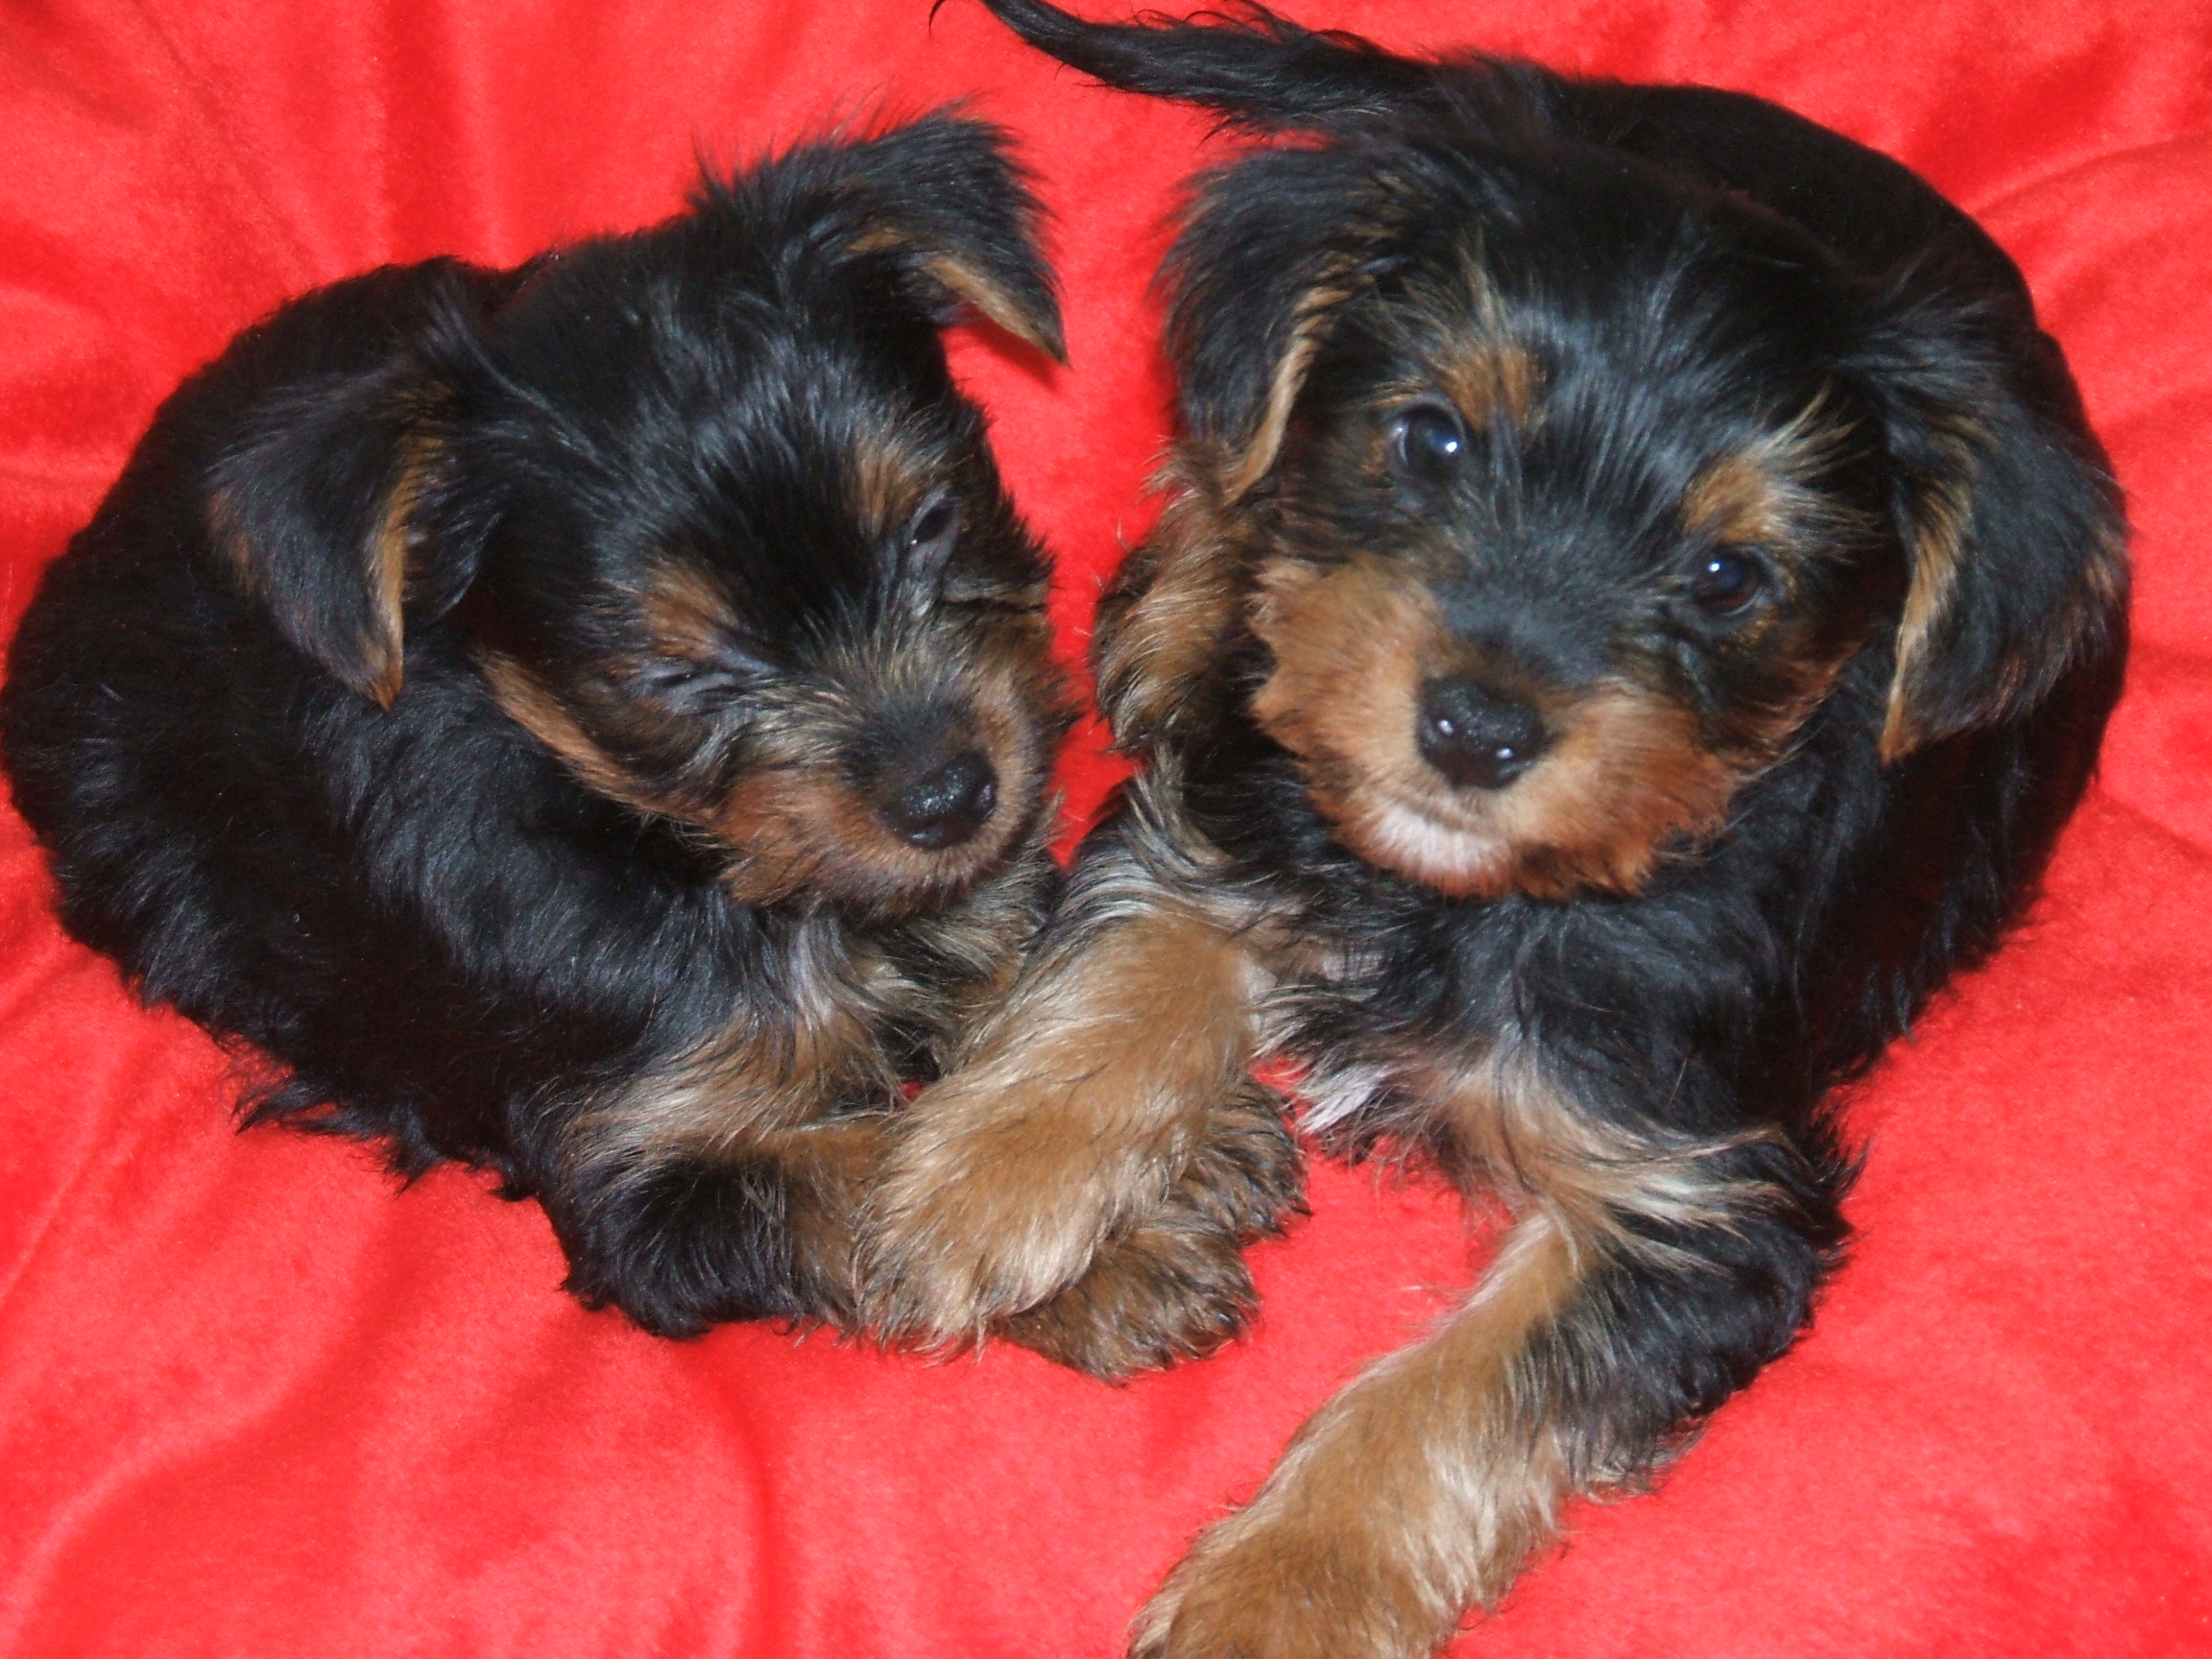 Get yorkie puppies for adoption in nc